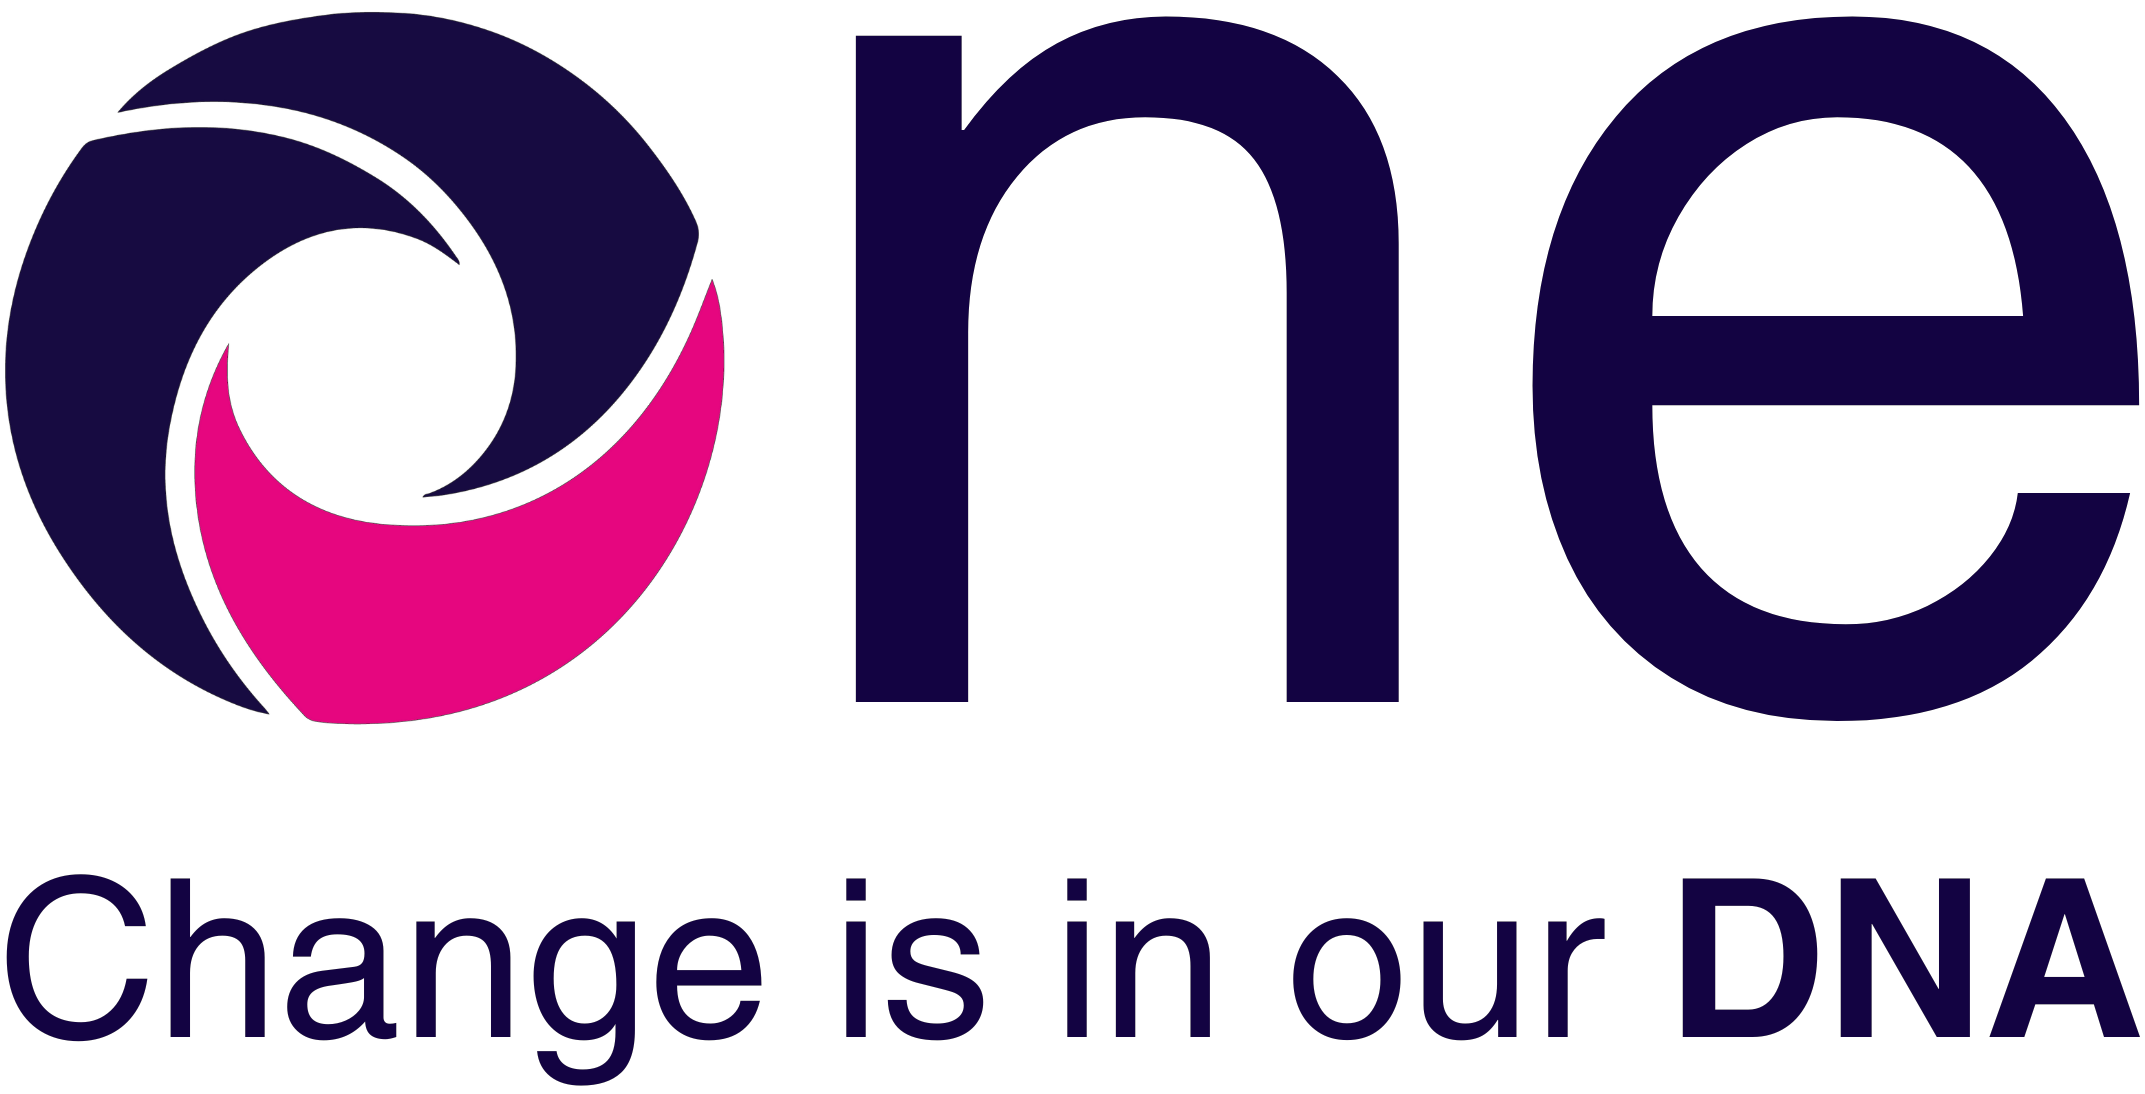 One Consulting Logo